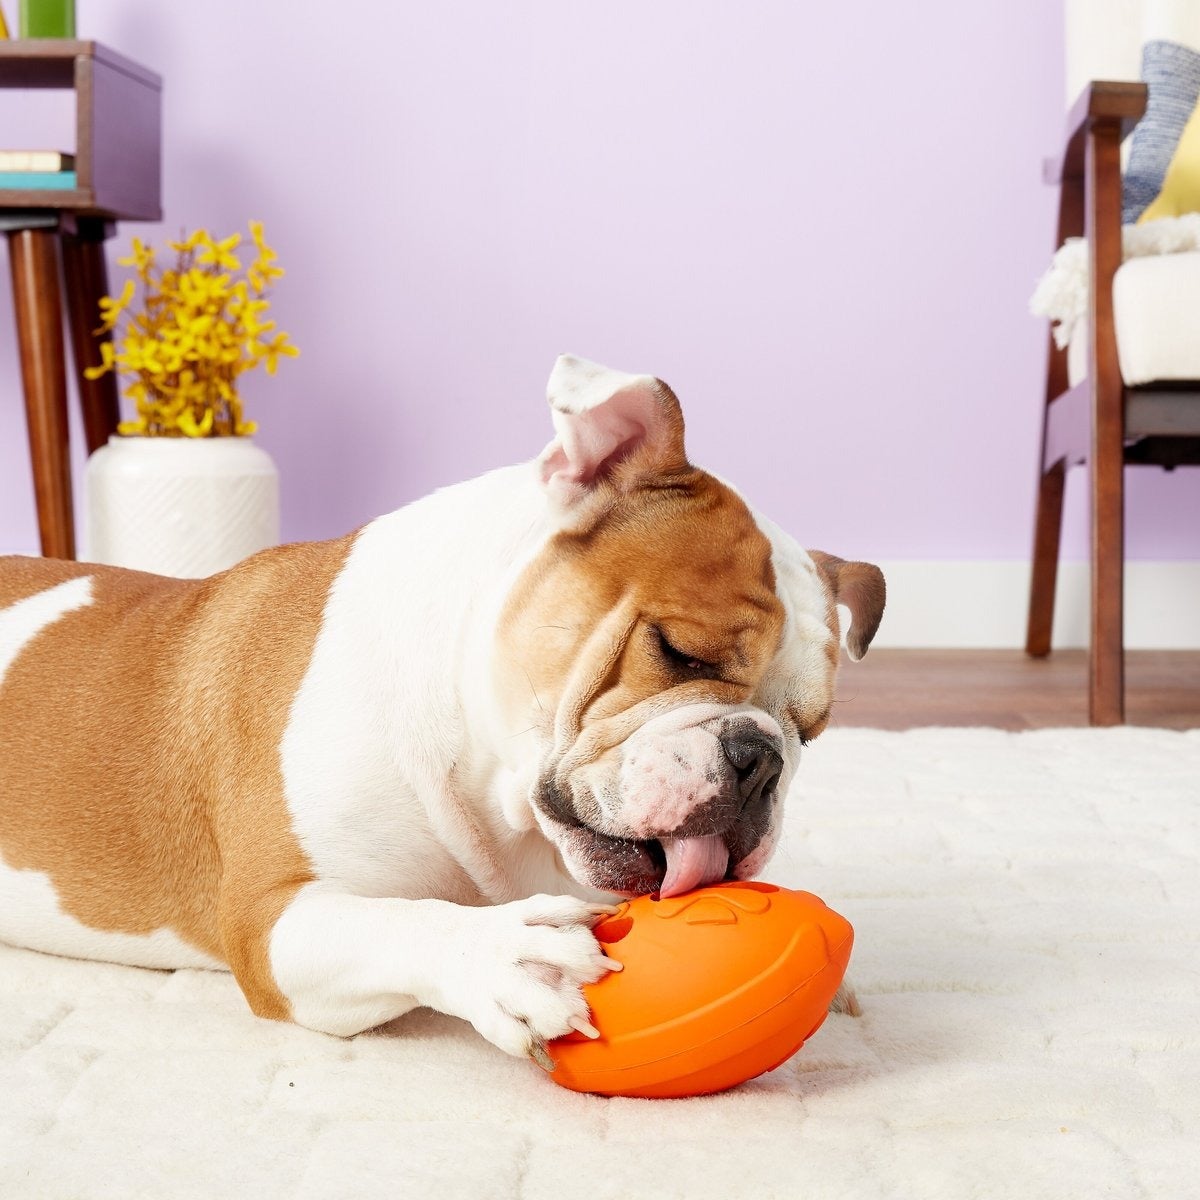 a dog licking an orange rubber football toy